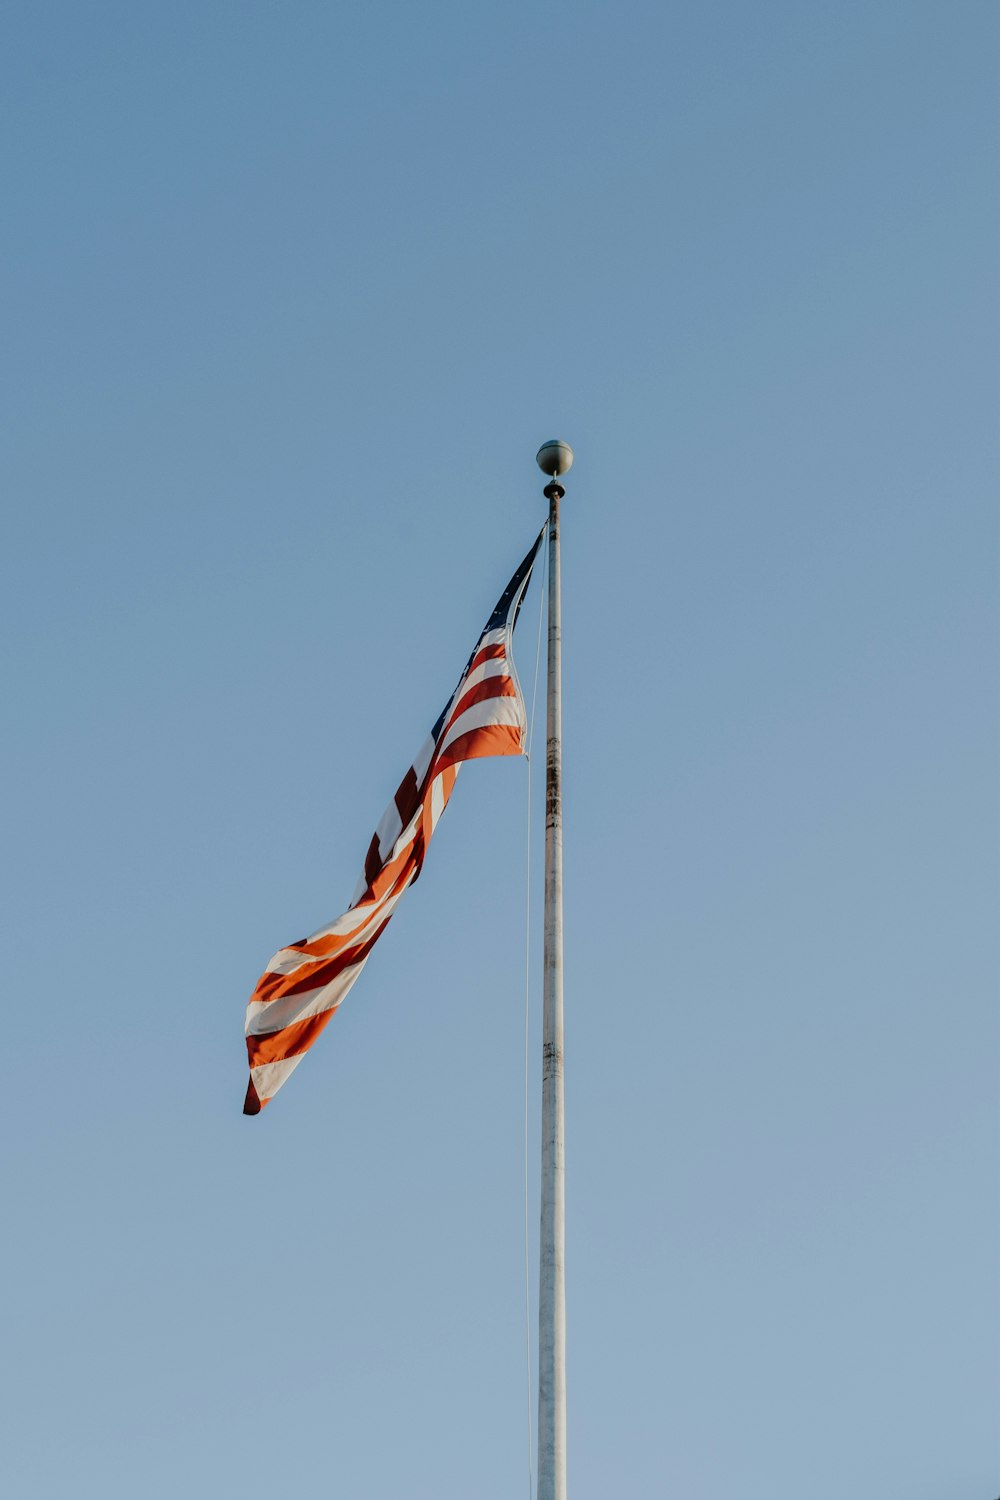 us a flag on flag pole during daytime